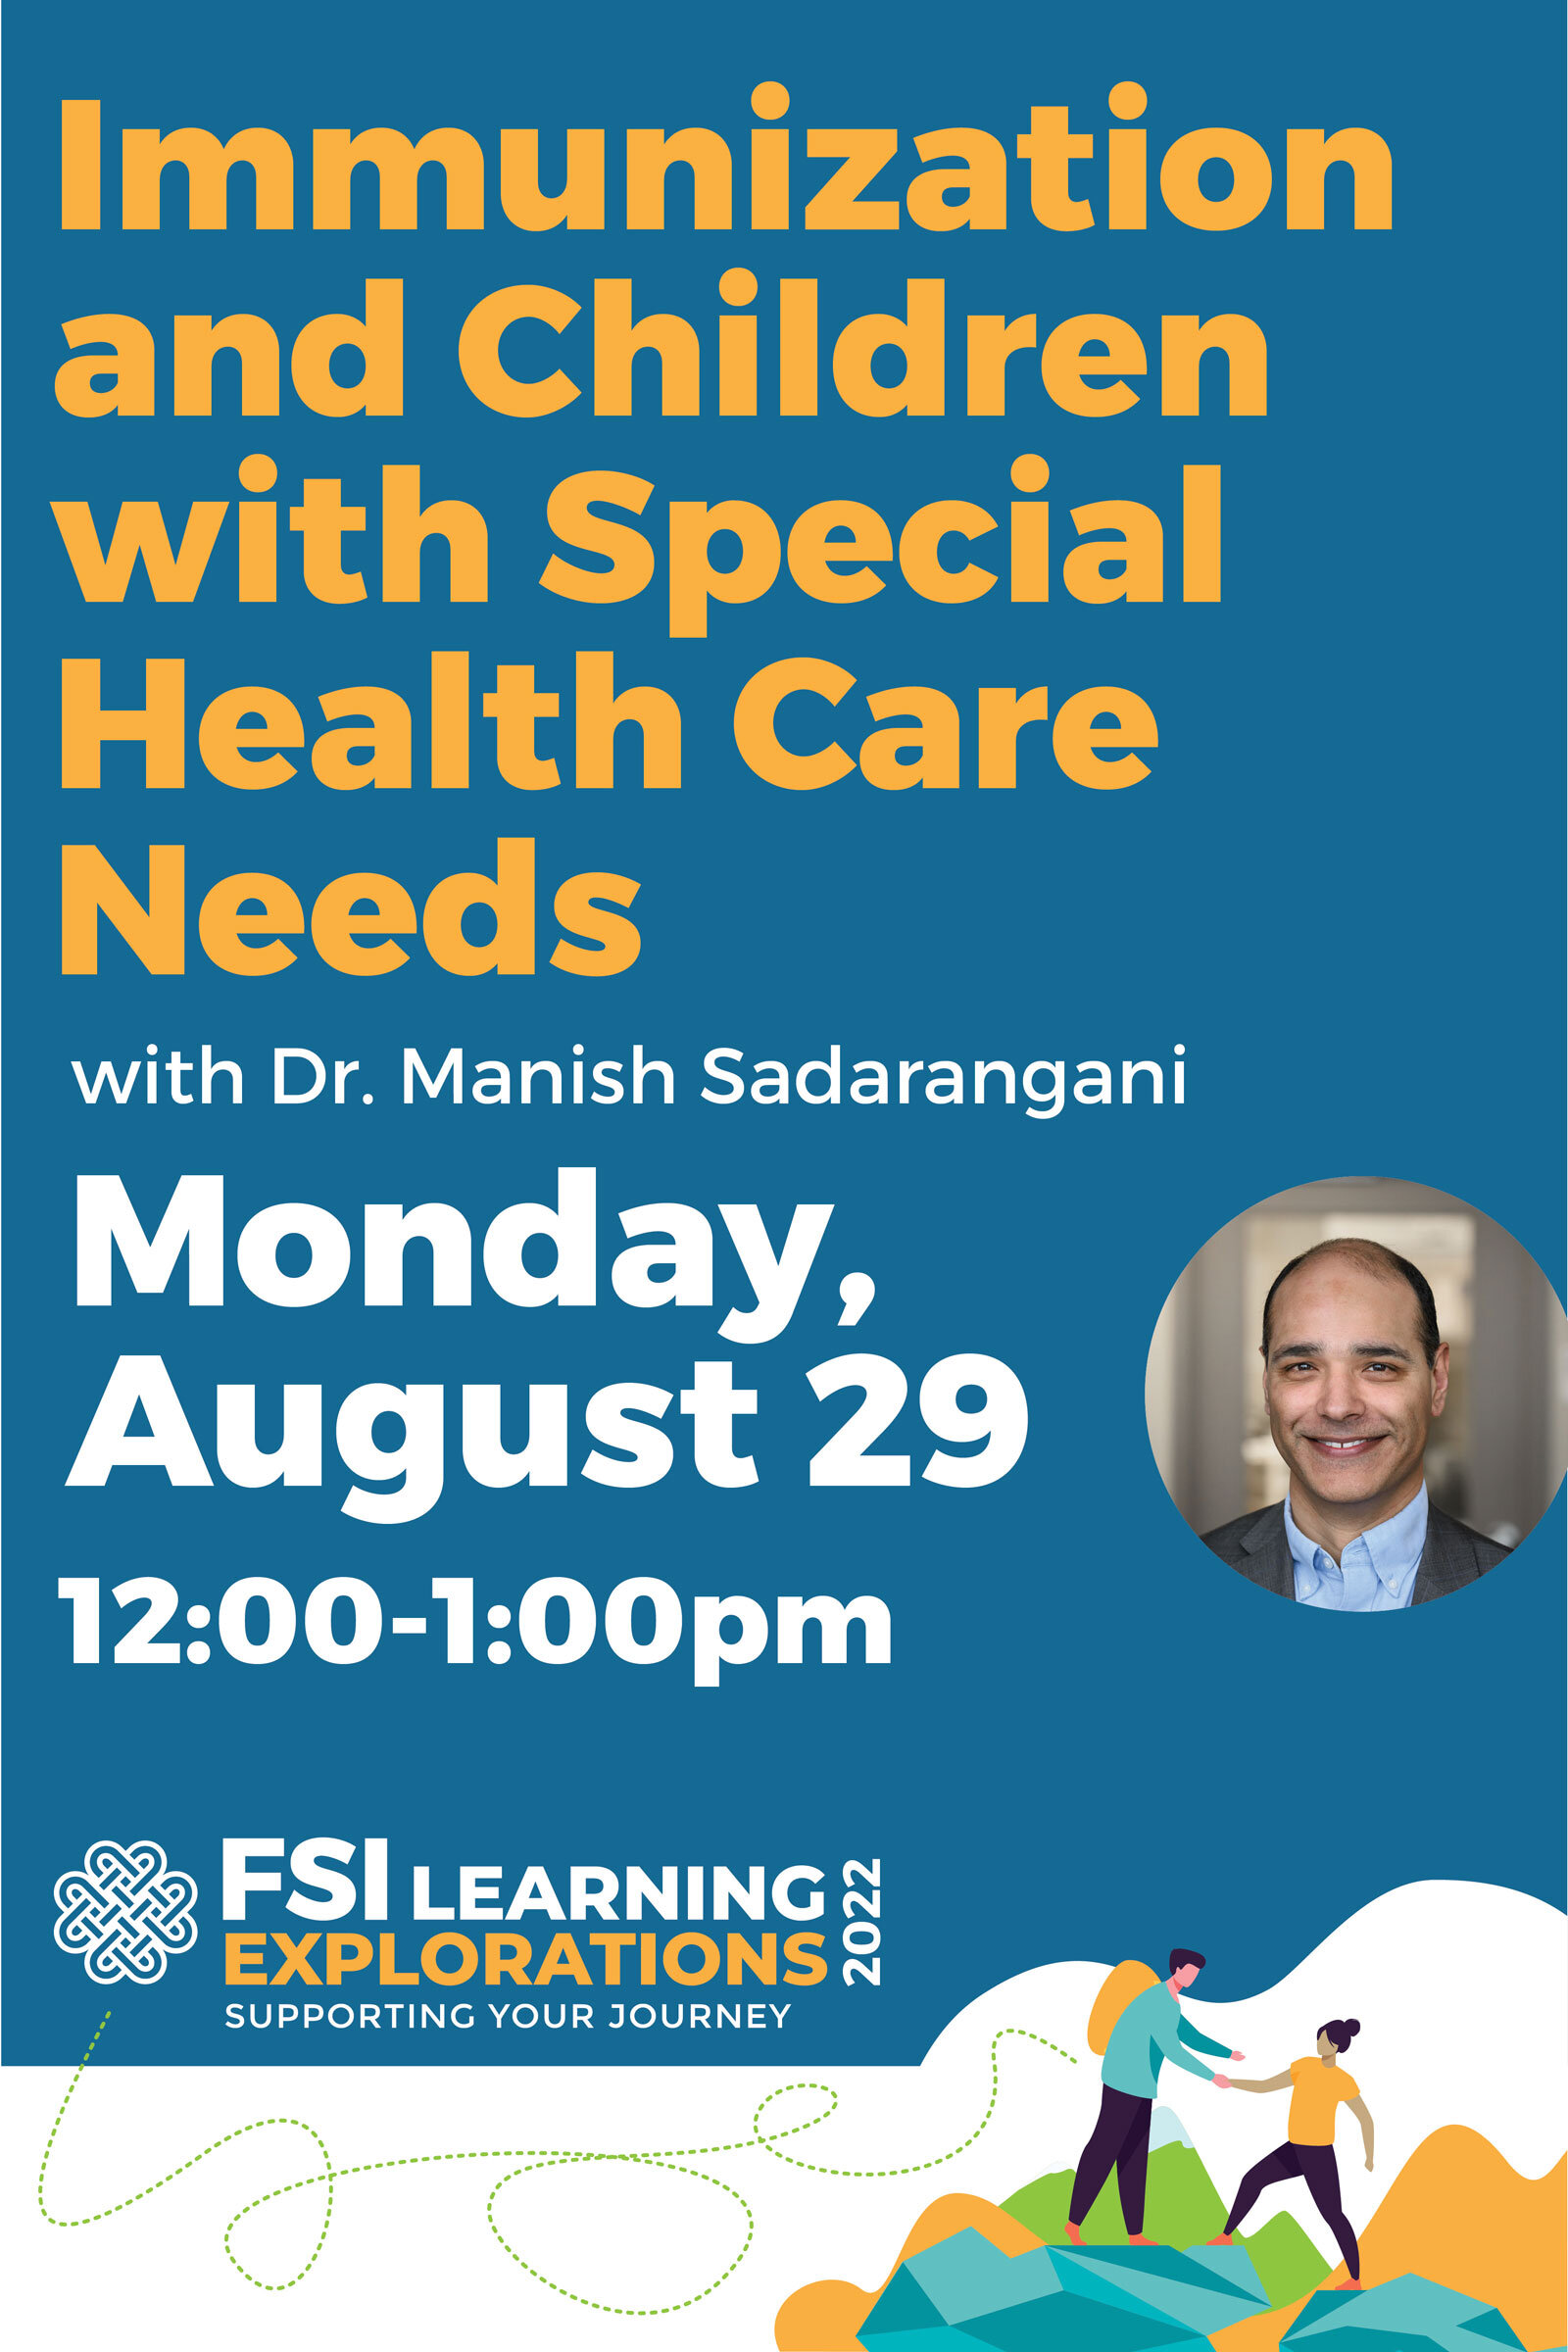 FSI Learning Explorations ~ Immunization and children with special health care needs